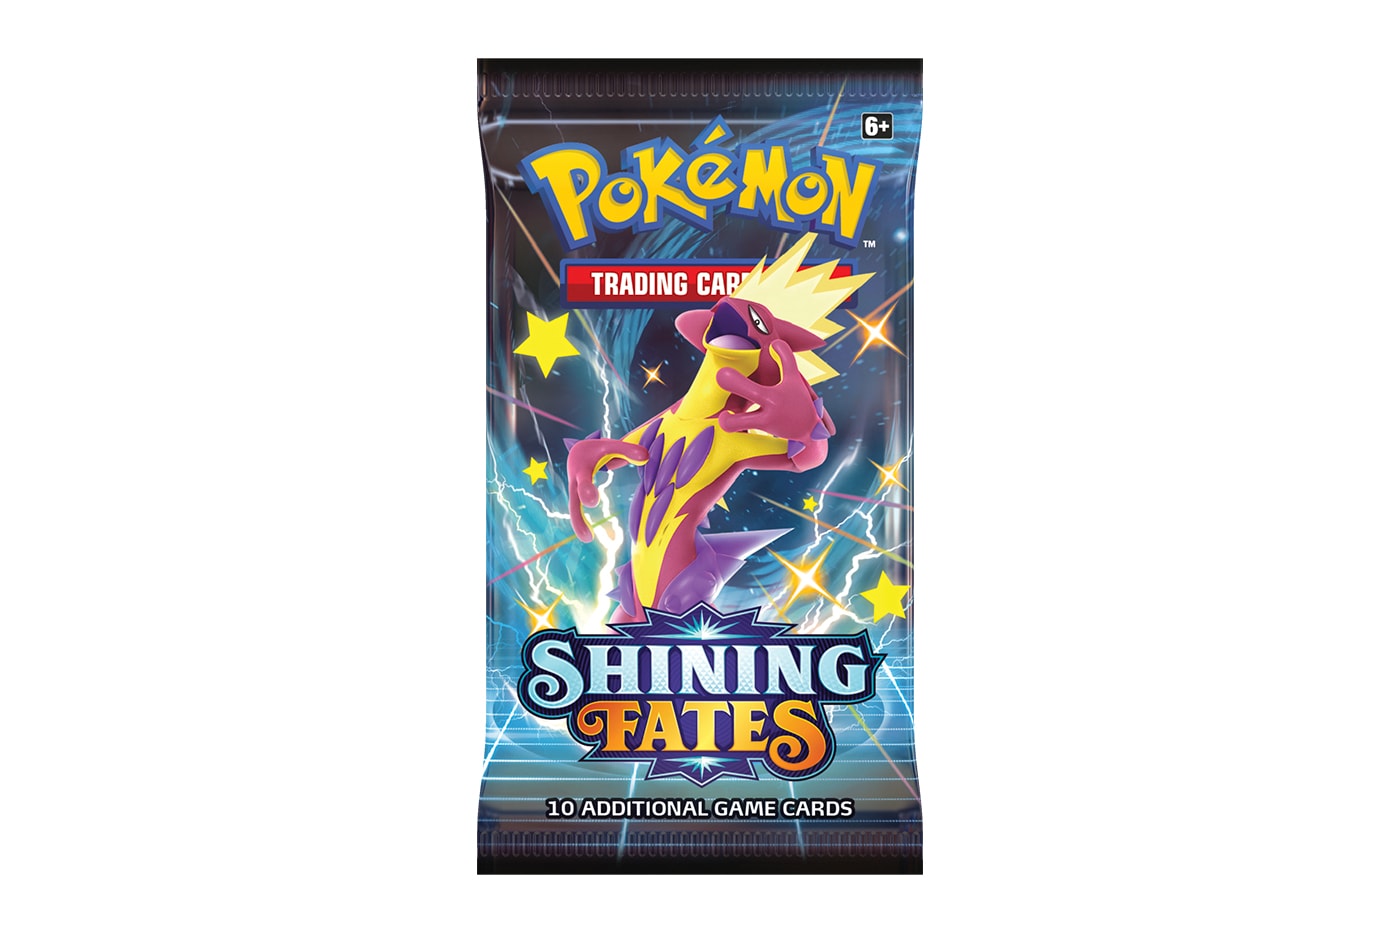 Pokémon Trading Card Game Shining Fates Expansion News Charizard Vmax V pikachu TCG Gaming collection collectors cards pokemon center